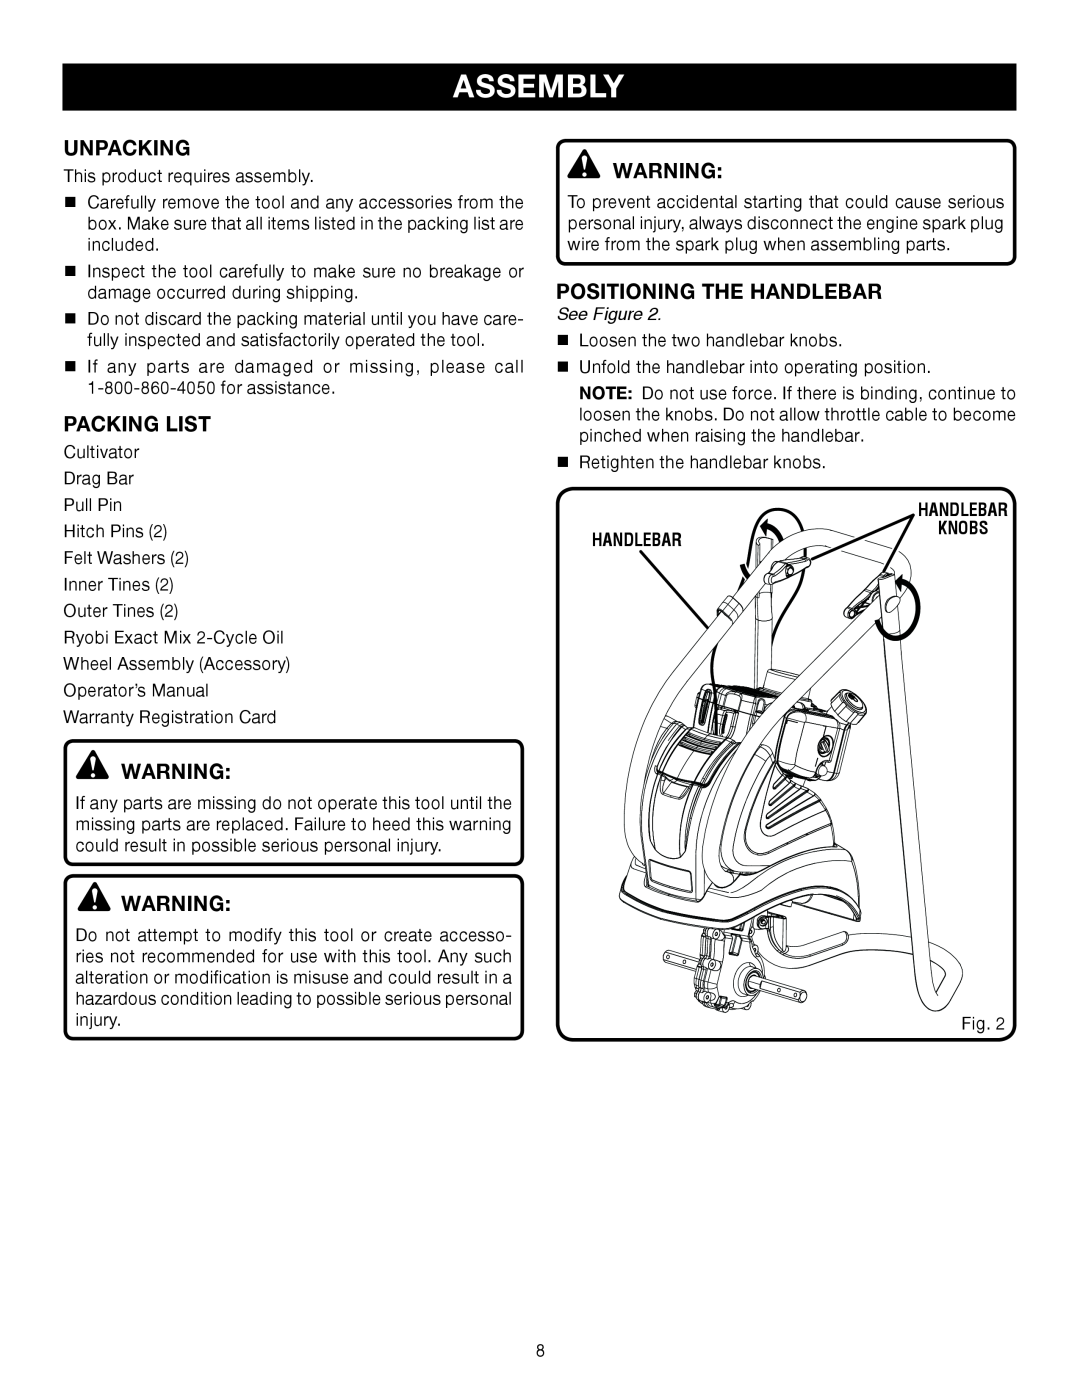 Ryobi Outdoor RY60511A manual Assembly, Unpacking, Packing List, Positioning The Handlebar, See Figure 